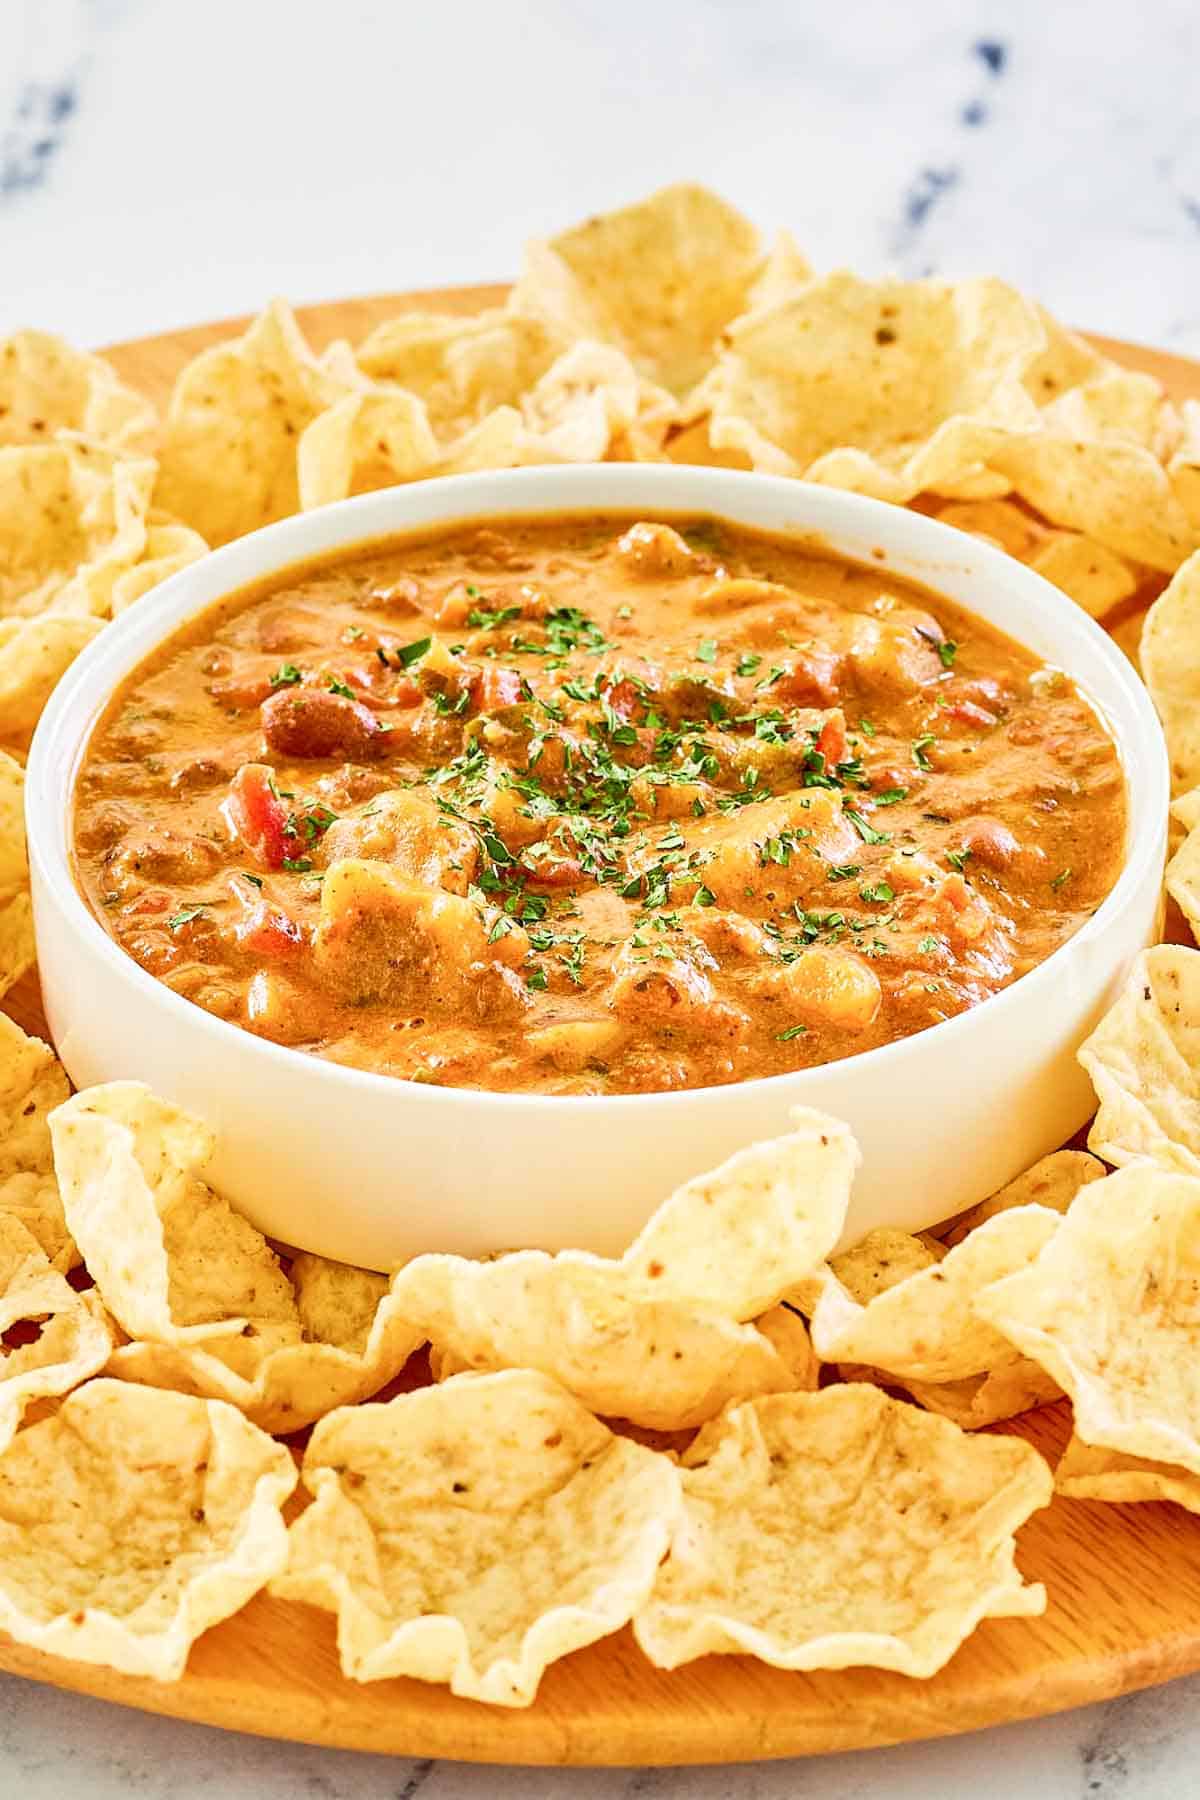 A bowl of tamale dip and tortilla chips on a wood platter.